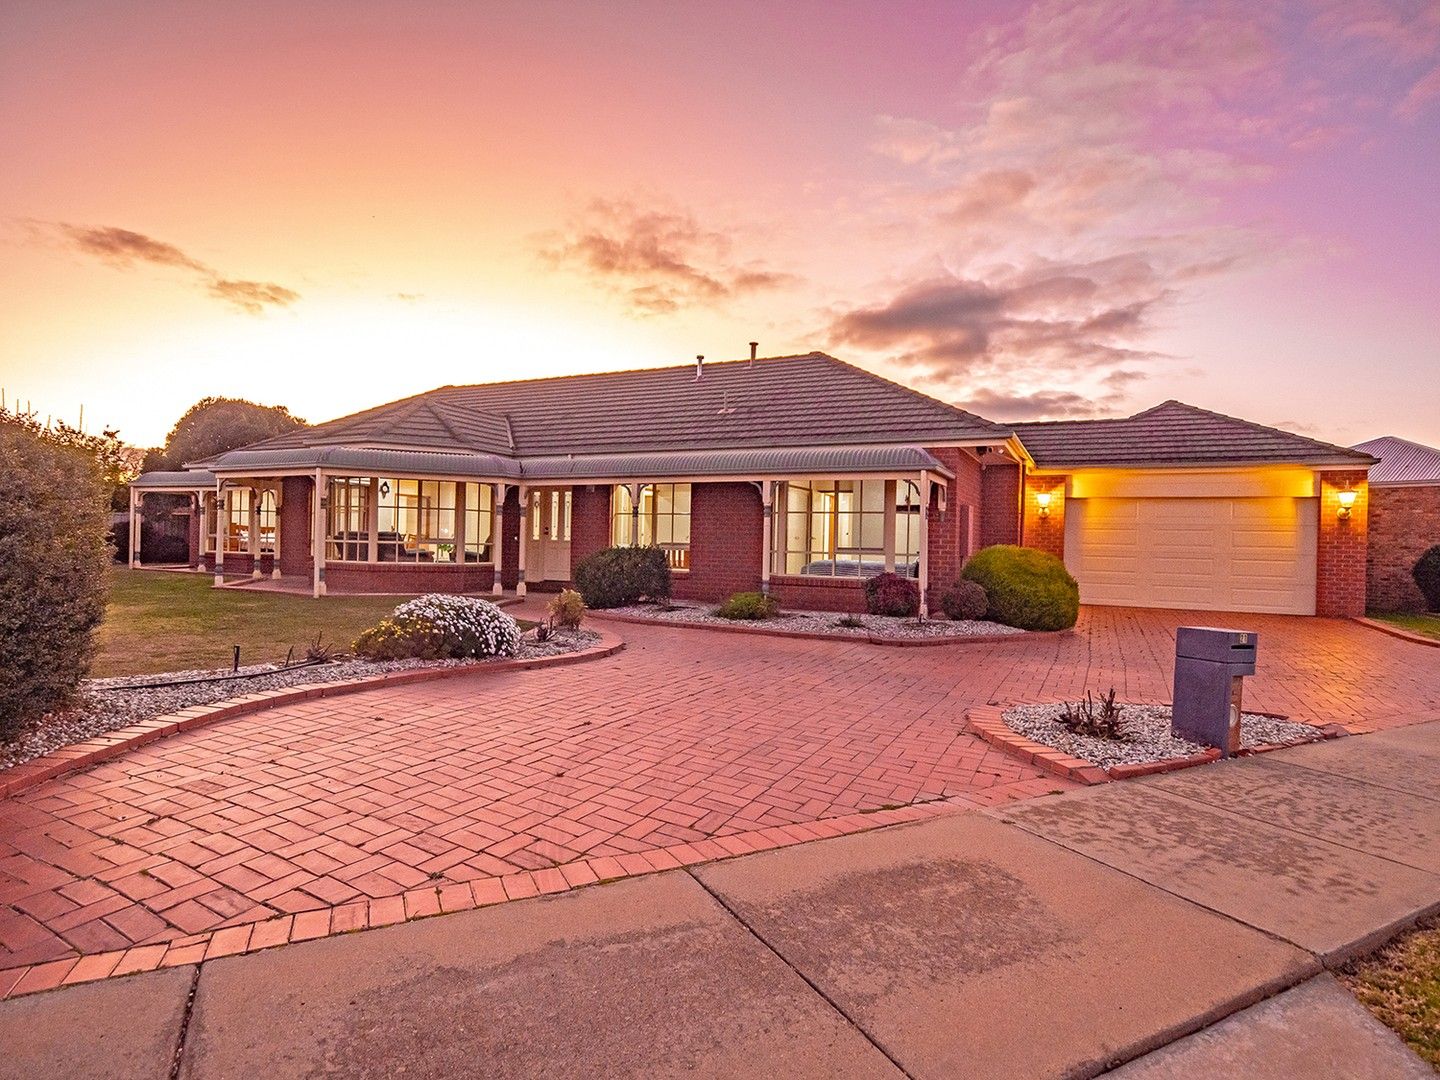 4 bedrooms House in 21 Merino Drive SHEPPARTON VIC, 3630